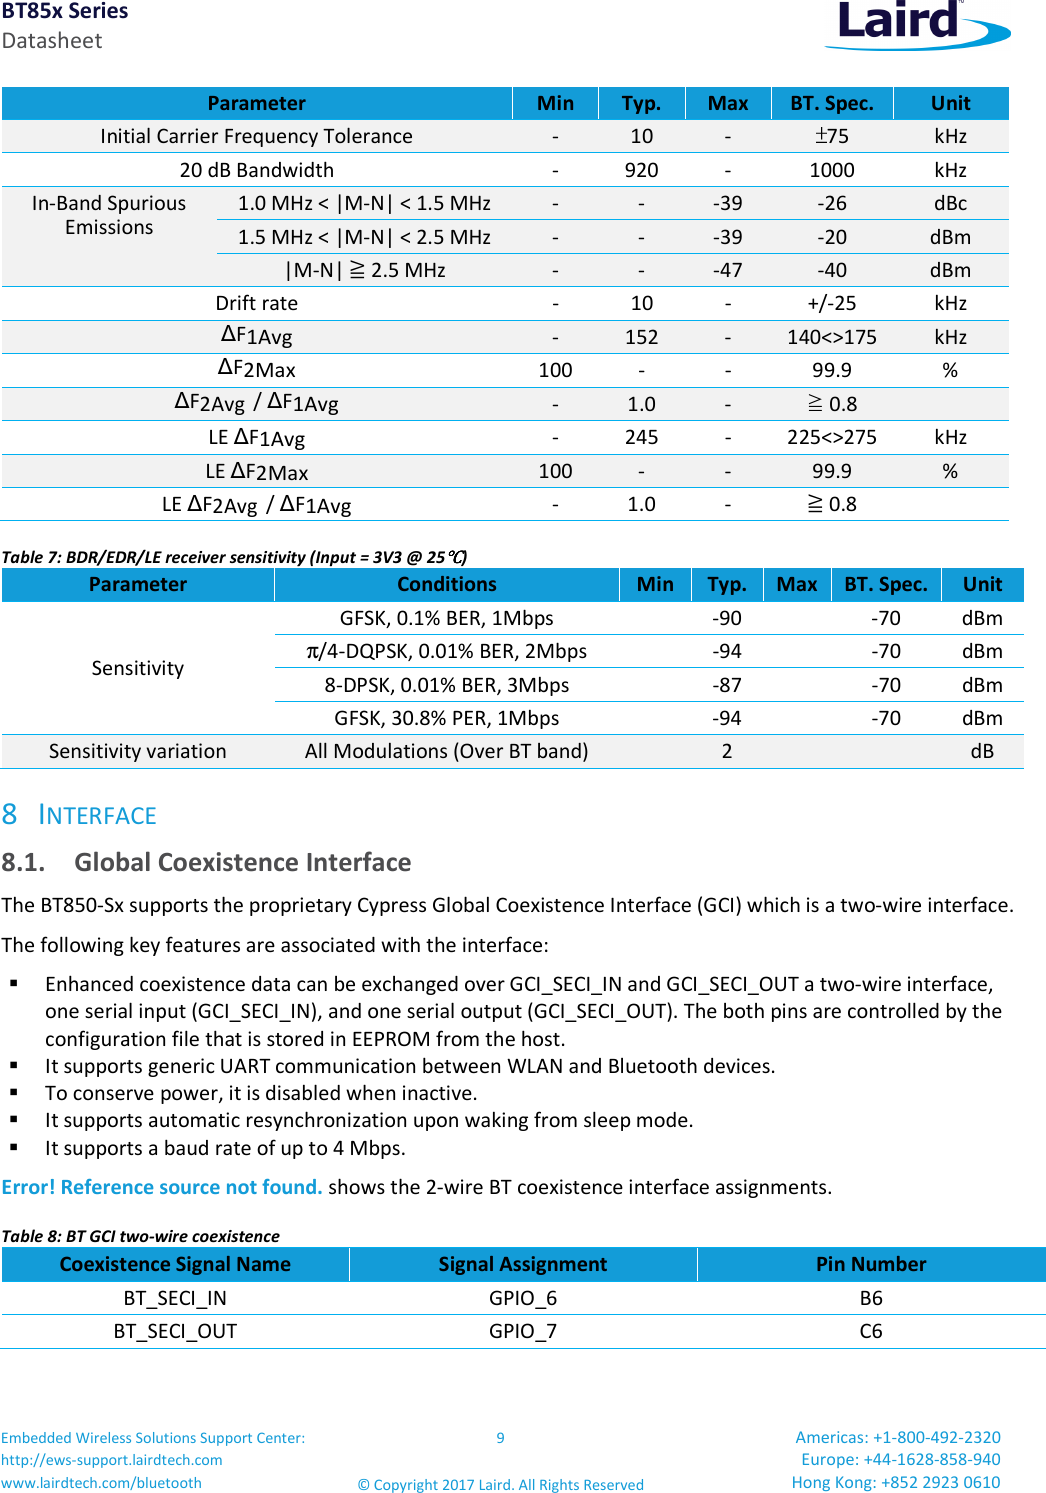 BT85x Series Datasheet Embedded Wireless Solutions Support Center: http://ews-support.lairdtech.com www.lairdtech.com/bluetooth 9 © Copyright 2017 Laird. All Rights Reserved Americas: +1-800-492-2320 Europe: +44-1628-858-940 Hong Kong: +852 2923 0610  Parameter  Min  Typ.  Max  BT. Spec.  Unit Initial Carrier Frequency Tolerance  -  10  -  75  kHz 20 dB Bandwidth  -  920  -  1000  kHz In-Band Spurious Emissions 1.0 MHz &lt; |M-N| &lt; 1.5 MHz  -  -  -39  -26  dBc 1.5 MHz &lt; |M-N| &lt; 2.5 MHz  -  -  -39  -20  dBm |M-N| ≧ 2.5 MHz  -  -  -47  -40  dBm Drift rate  -  10  -  +/-25  kHz ∆F1Avg  -  152  -  140&lt;&gt;175 kHz ∆F2Max 100  -  -  99.9  % ∆F2Avg / ∆F1Avg  -  1.0  -  ≧ 0.8   LE ∆F1Avg  -  245  -  225&lt;&gt;275 kHz LE ∆F2Max  100  -  -  99.9  % LE ∆F2Avg  / ∆F1Avg  -  1.0  - ≧ 0.8   Table 7: BDR/EDR/LE receiver sensitivity (Input = 3V3 @ 25℃℃℃℃) Parameter  Conditions  Min Typ. Max BT. Spec. Unit Sensitivity GFSK, 0.1% BER, 1Mbps    -90    -70  dBm π/4-DQPSK, 0.01% BER, 2Mbps    -94    -70  dBm 8-DPSK, 0.01% BER, 3Mbps    -87    -70  dBm GFSK, 30.8% PER, 1Mbps    -94    -70  dBm Sensitivity variation  All Modulations (Over BT band)    2      dB 8 INTERFACE 8.1. Global Coexistence Interface The BT850-Sx supports the proprietary Cypress Global Coexistence Interface (GCI) which is a two-wire interface. The following key features are associated with the interface:  Enhanced coexistence data can be exchanged over GCI_SECI_IN and GCI_SECI_OUT a two-wire interface, one serial input (GCI_SECI_IN), and one serial output (GCI_SECI_OUT). The both pins are controlled by the configuration file that is stored in EEPROM from the host.  It supports generic UART communication between WLAN and Bluetooth devices.  To conserve power, it is disabled when inactive.  It supports automatic resynchronization upon waking from sleep mode.  It supports a baud rate of up to 4 Mbps. Error! Reference source not found. shows the 2-wire BT coexistence interface assignments. Table 8: BT GCI two-wire coexistence Coexistence Signal Name  Signal Assignment  Pin Number BT_SECI_IN  GPIO_6  B6 BT_SECI_OUT  GPIO_7  C6  